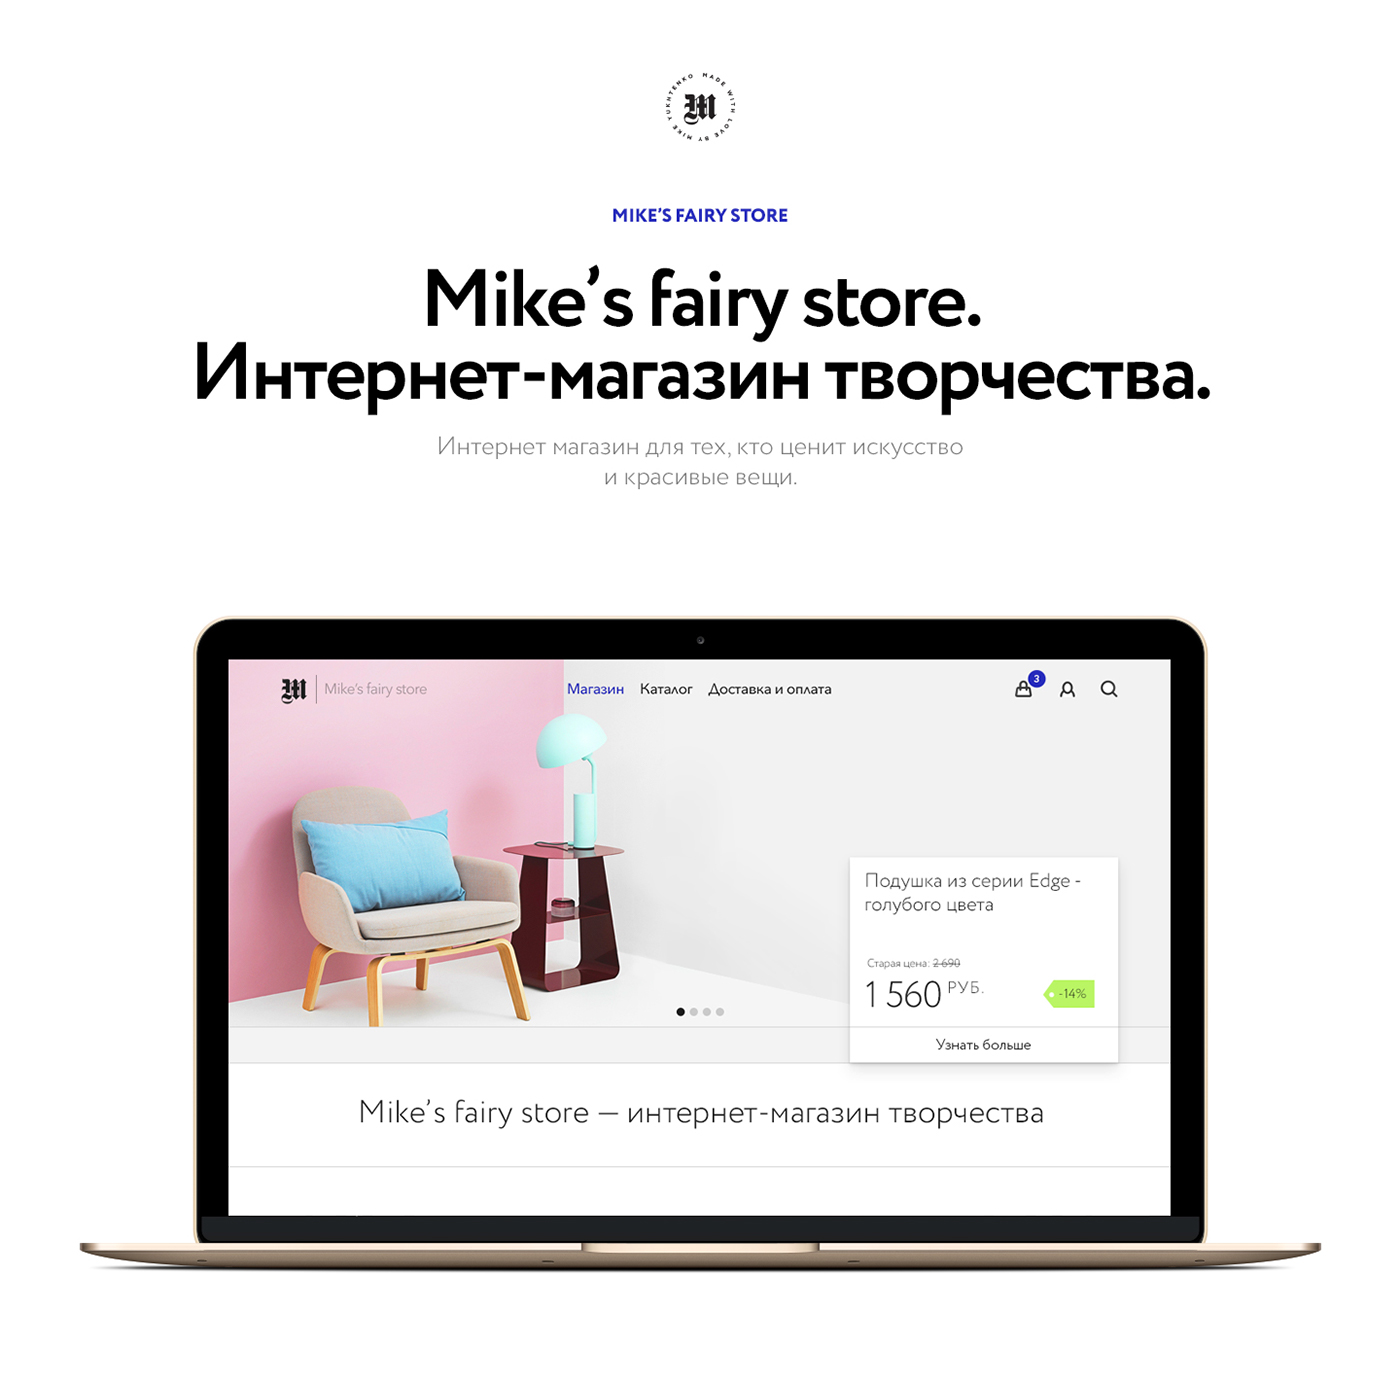 mike fairy store maicle shop e-commerce mobile site